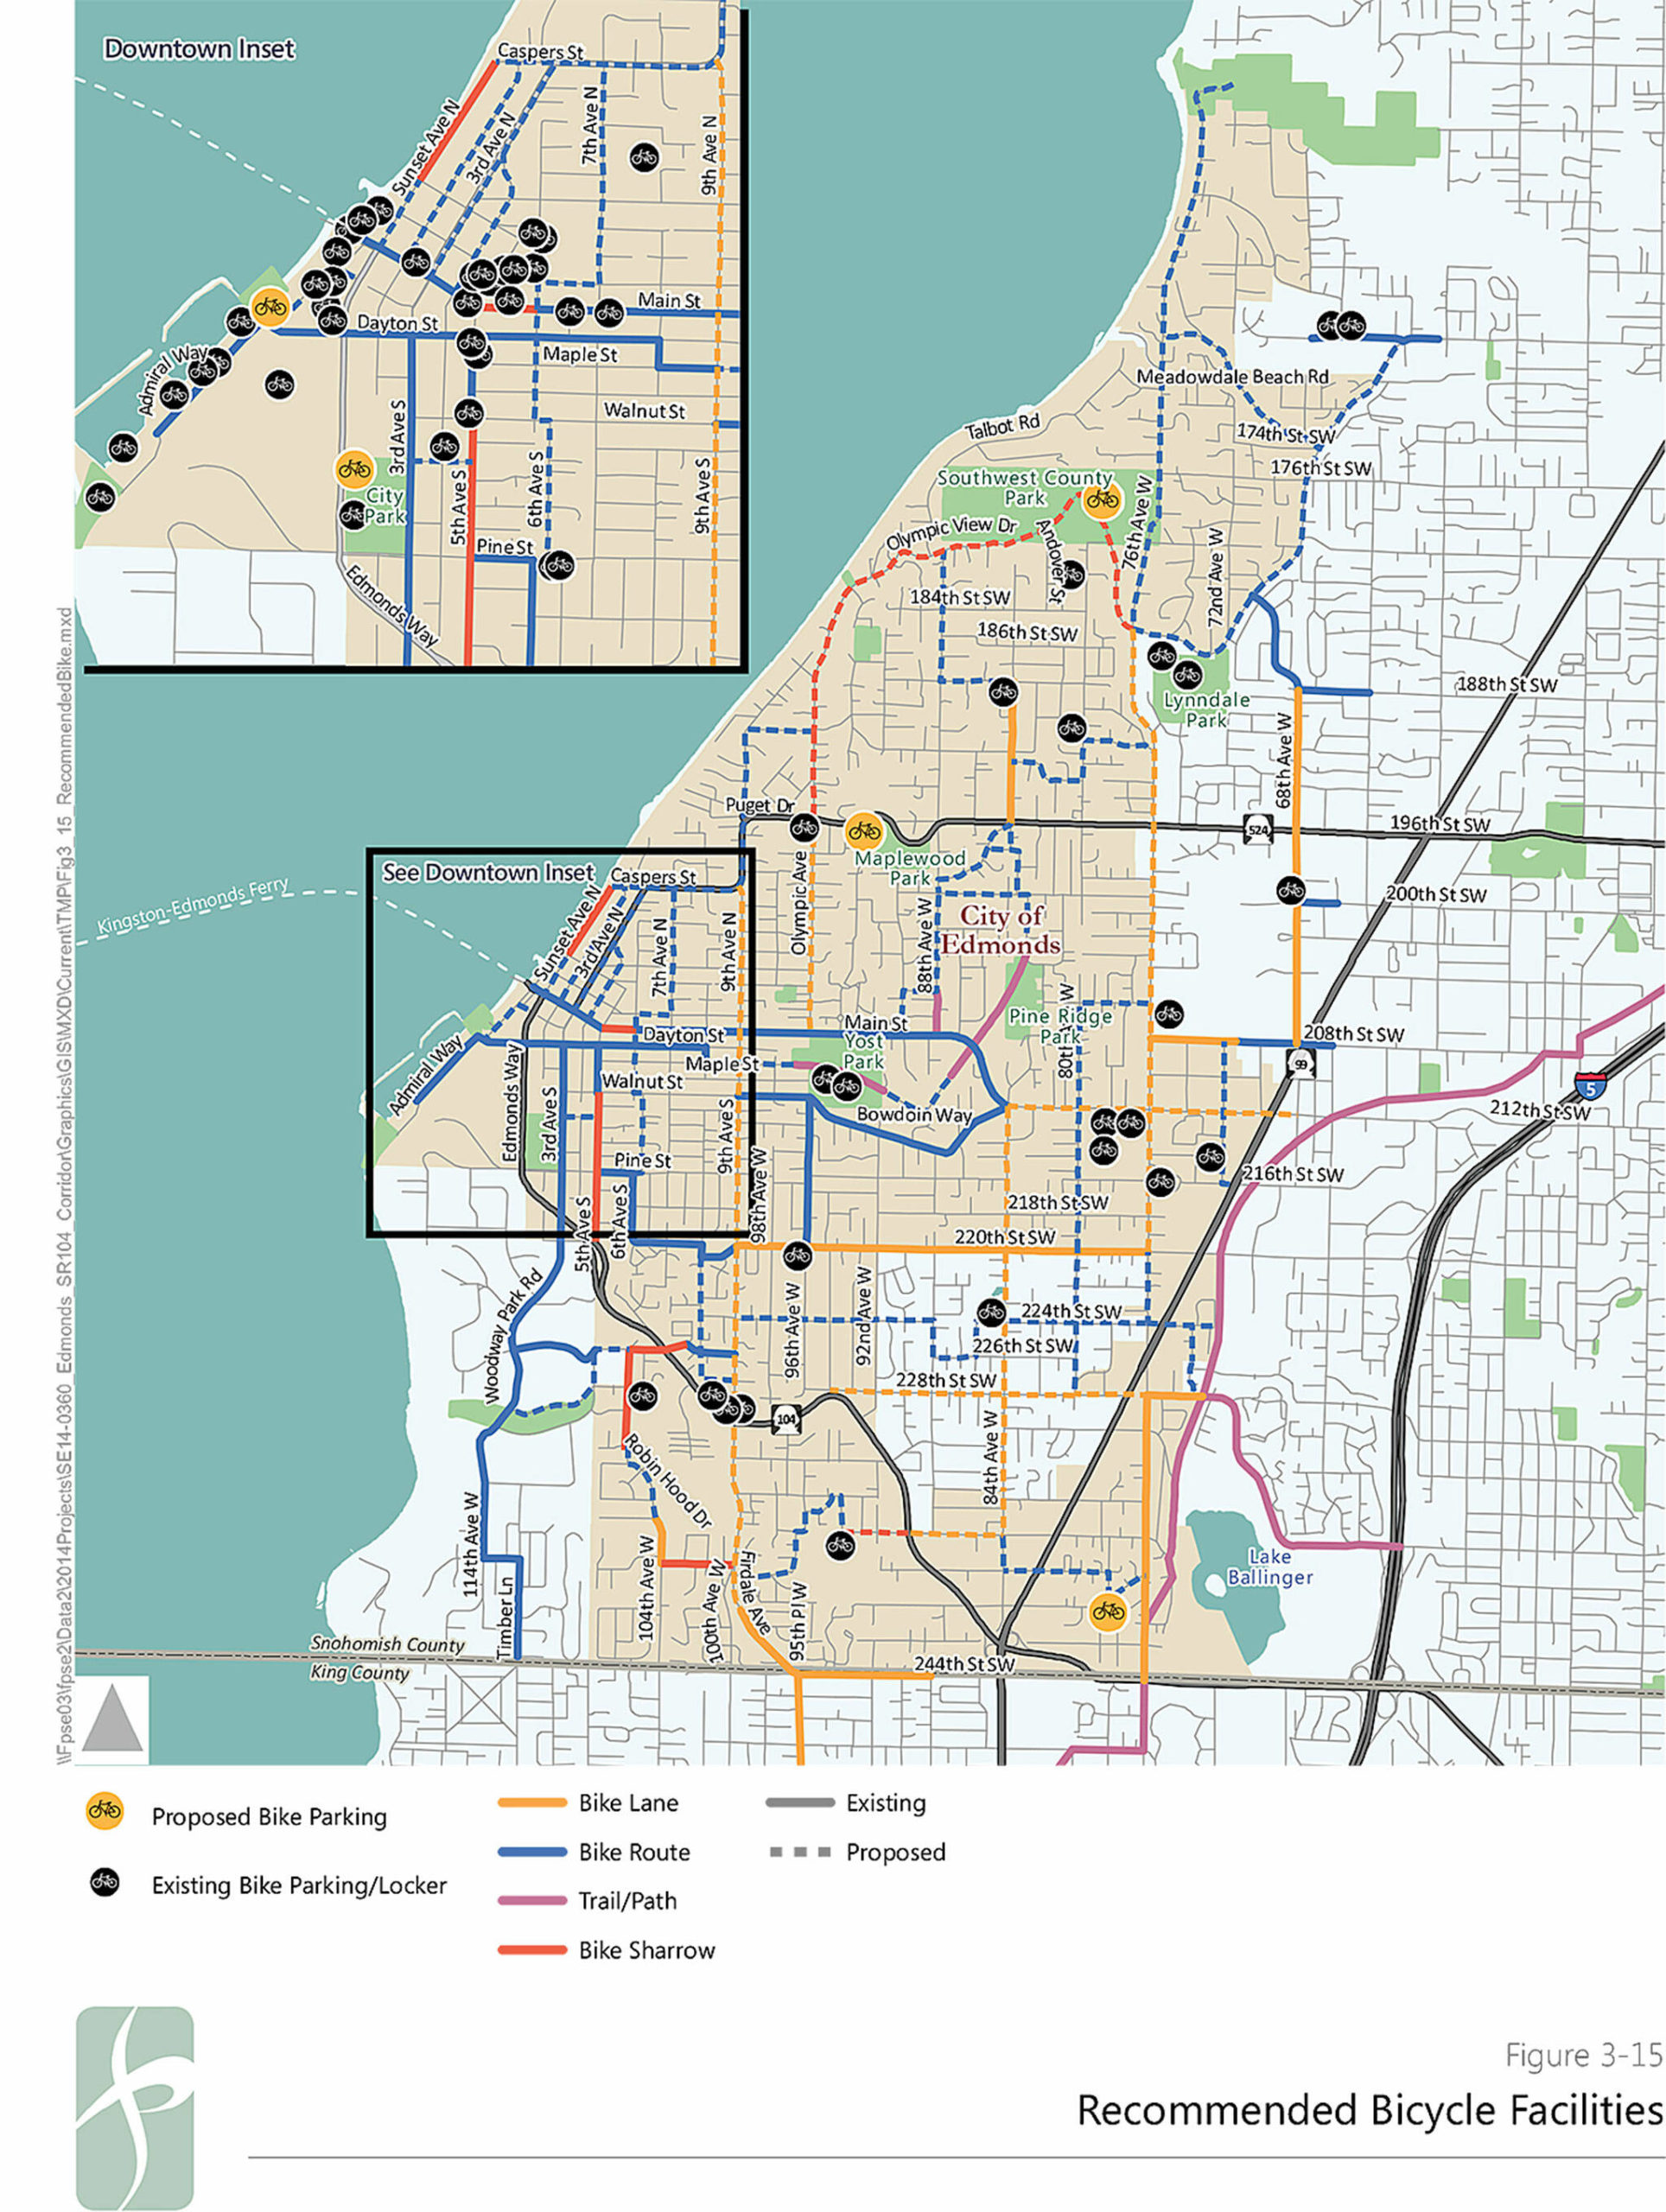 The proposed bike plan for Edmonds includes a project to build bike lanes on 100th Avenue W/Ninth Avenue W, between 244th Street SW and Walnut Street. (City of Edmonds)